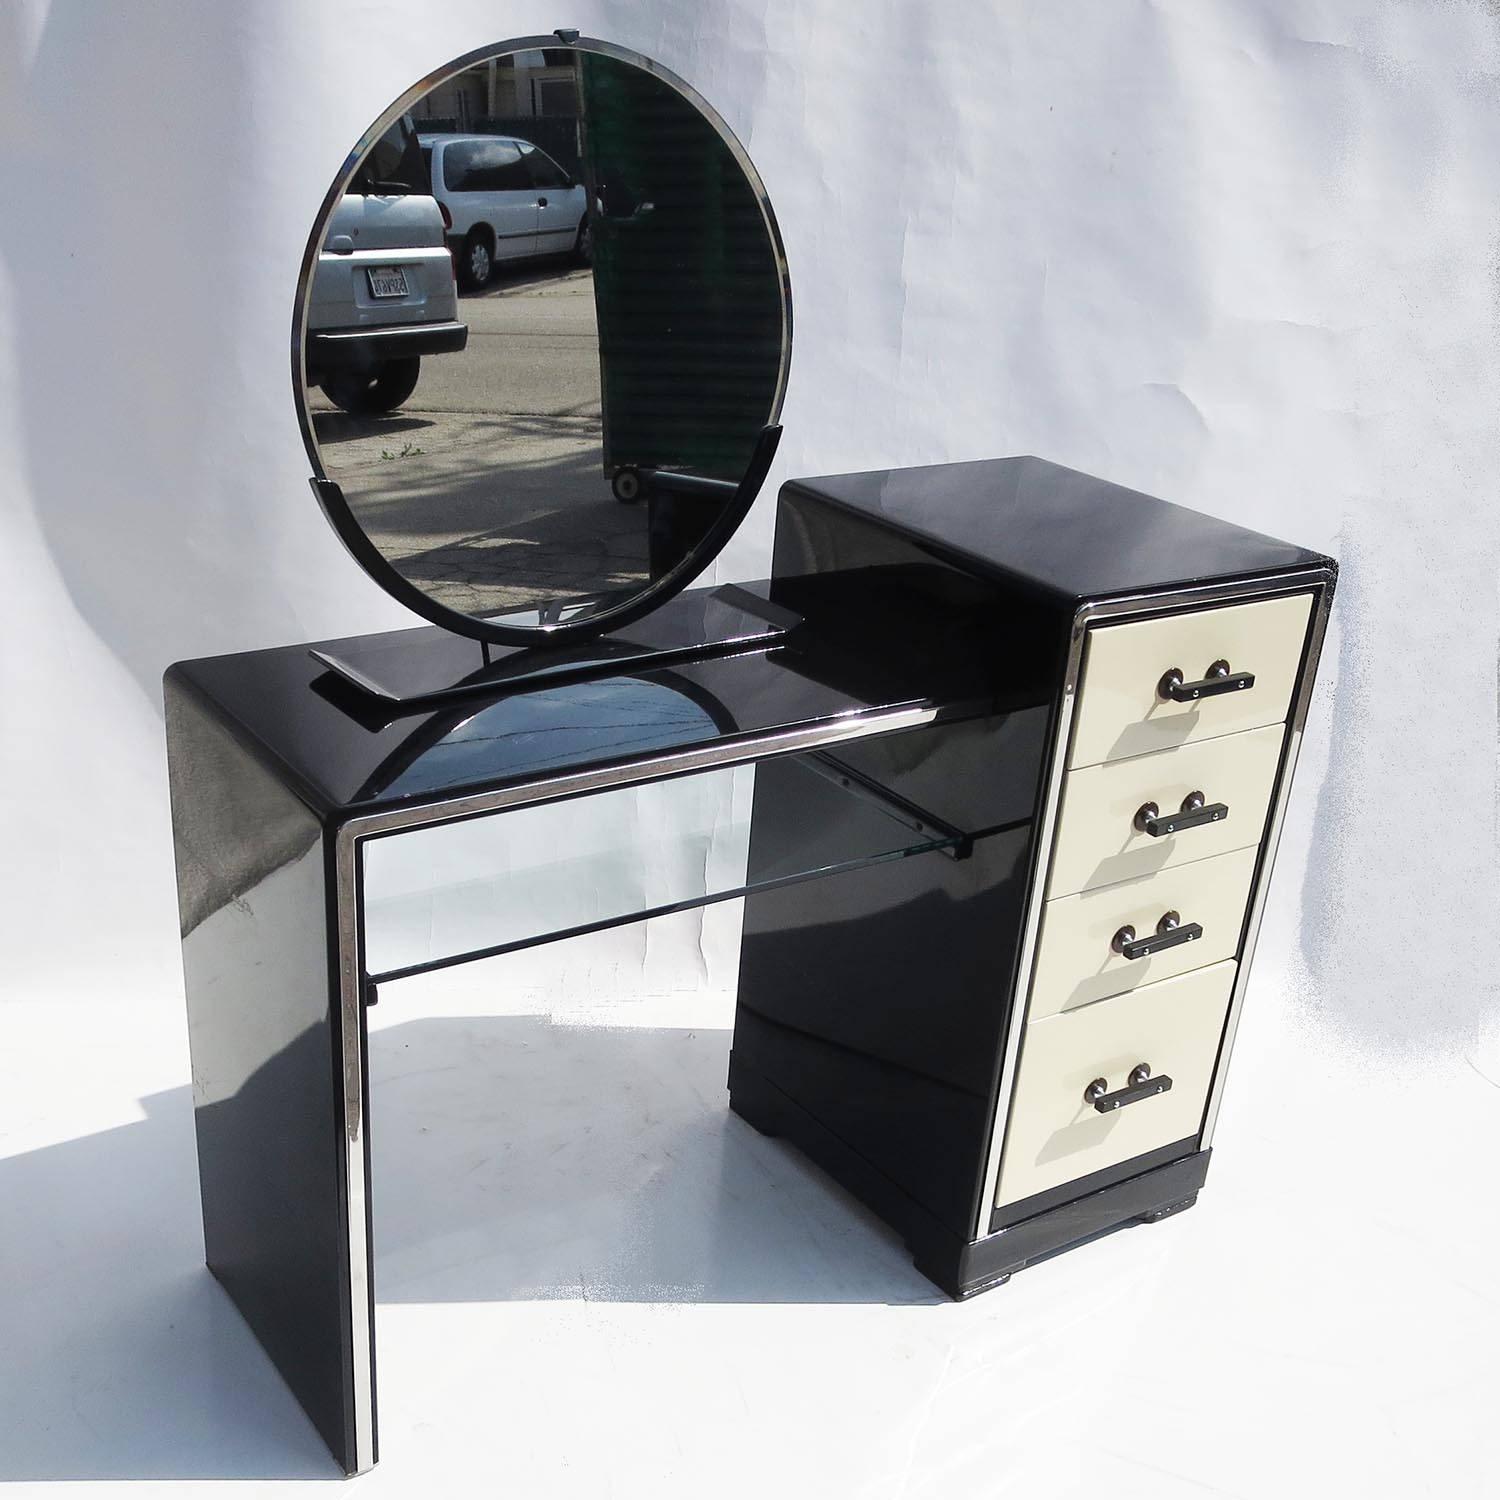 This wonderful and stylized set was designed by famed Industrial designer Norman Bel Geddes for the Simmons Furniture Company in 1934. The set is complete, consisting of the dressing table, a matching bench and tabletop mirror. All pieces are